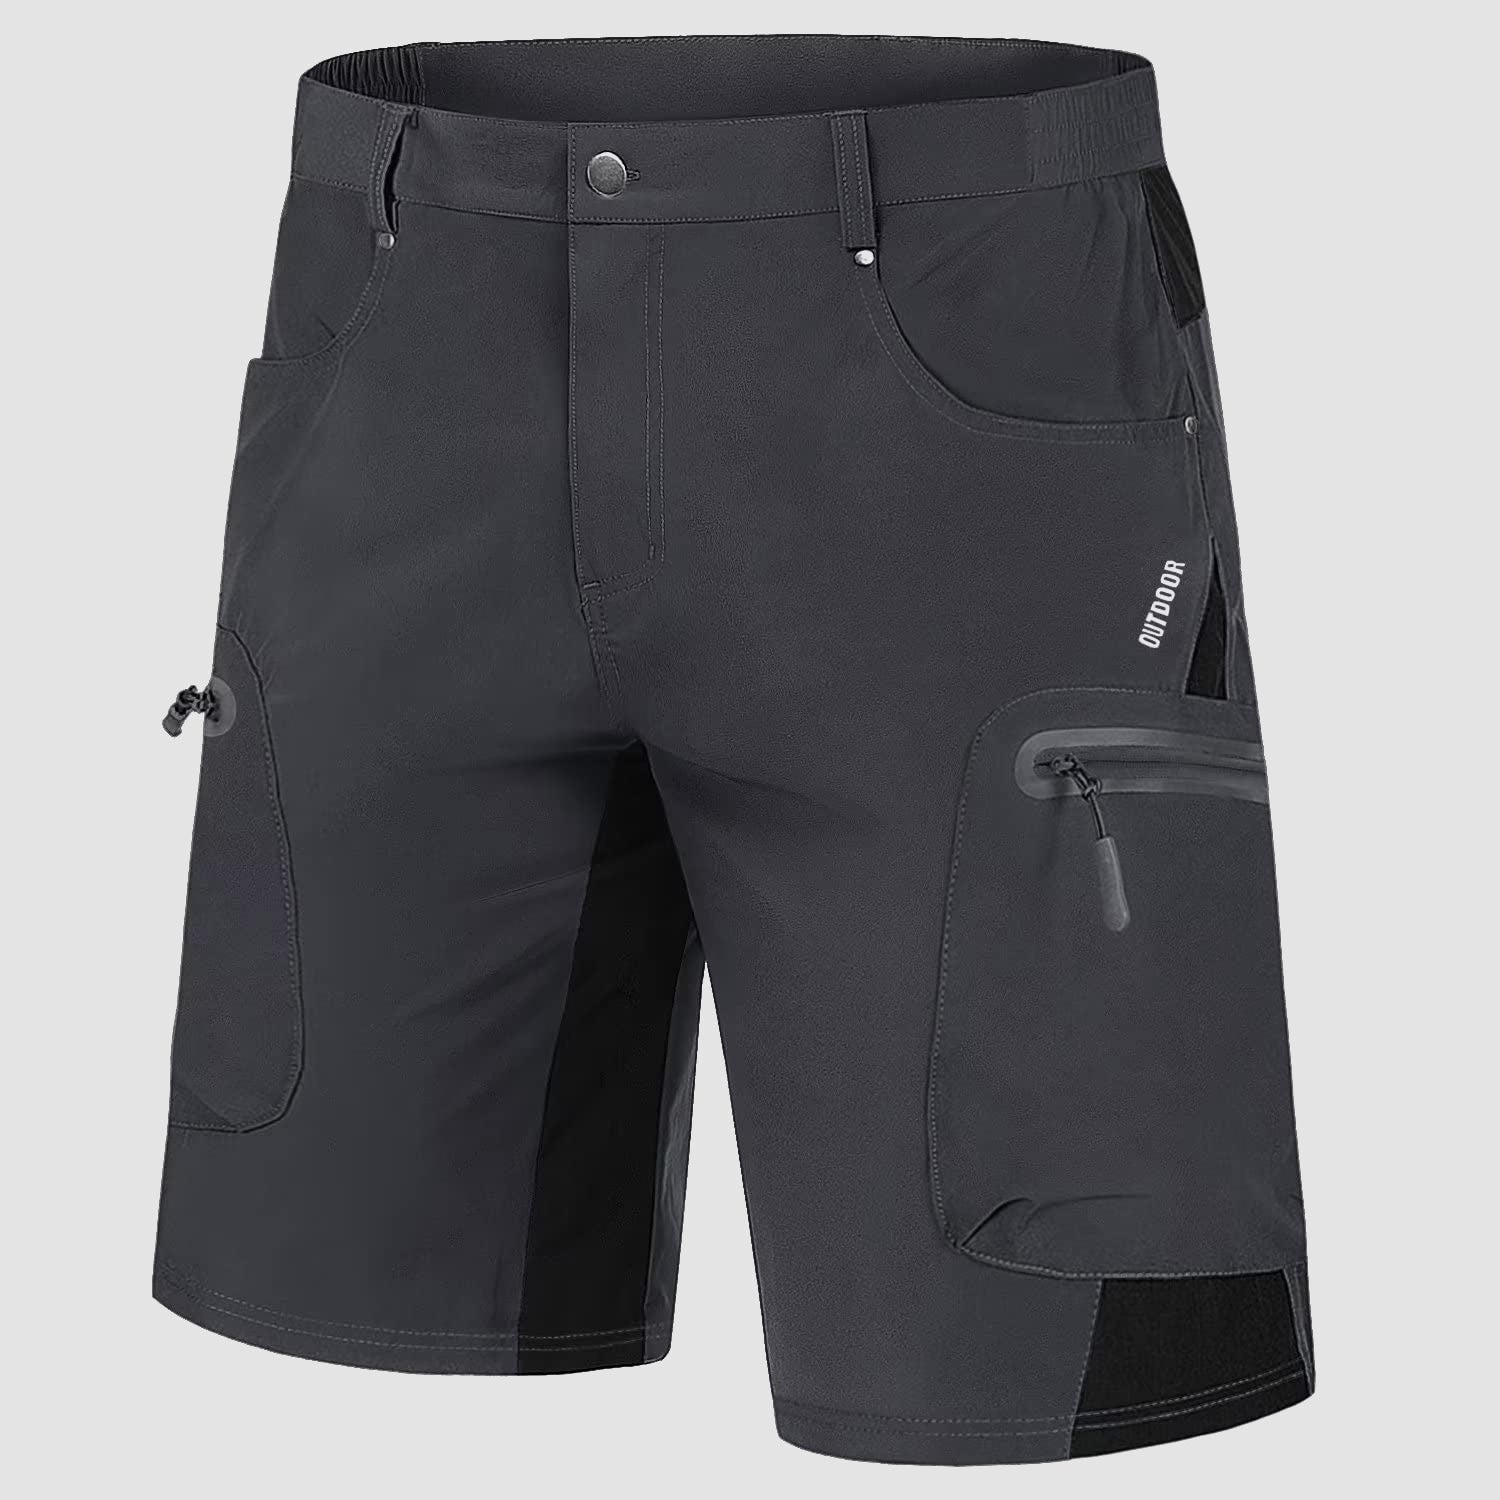 【Buy 4 Get the 4th Free！】Men's Cargo Shorts  Quick Dry Lightweight & Water Repellent